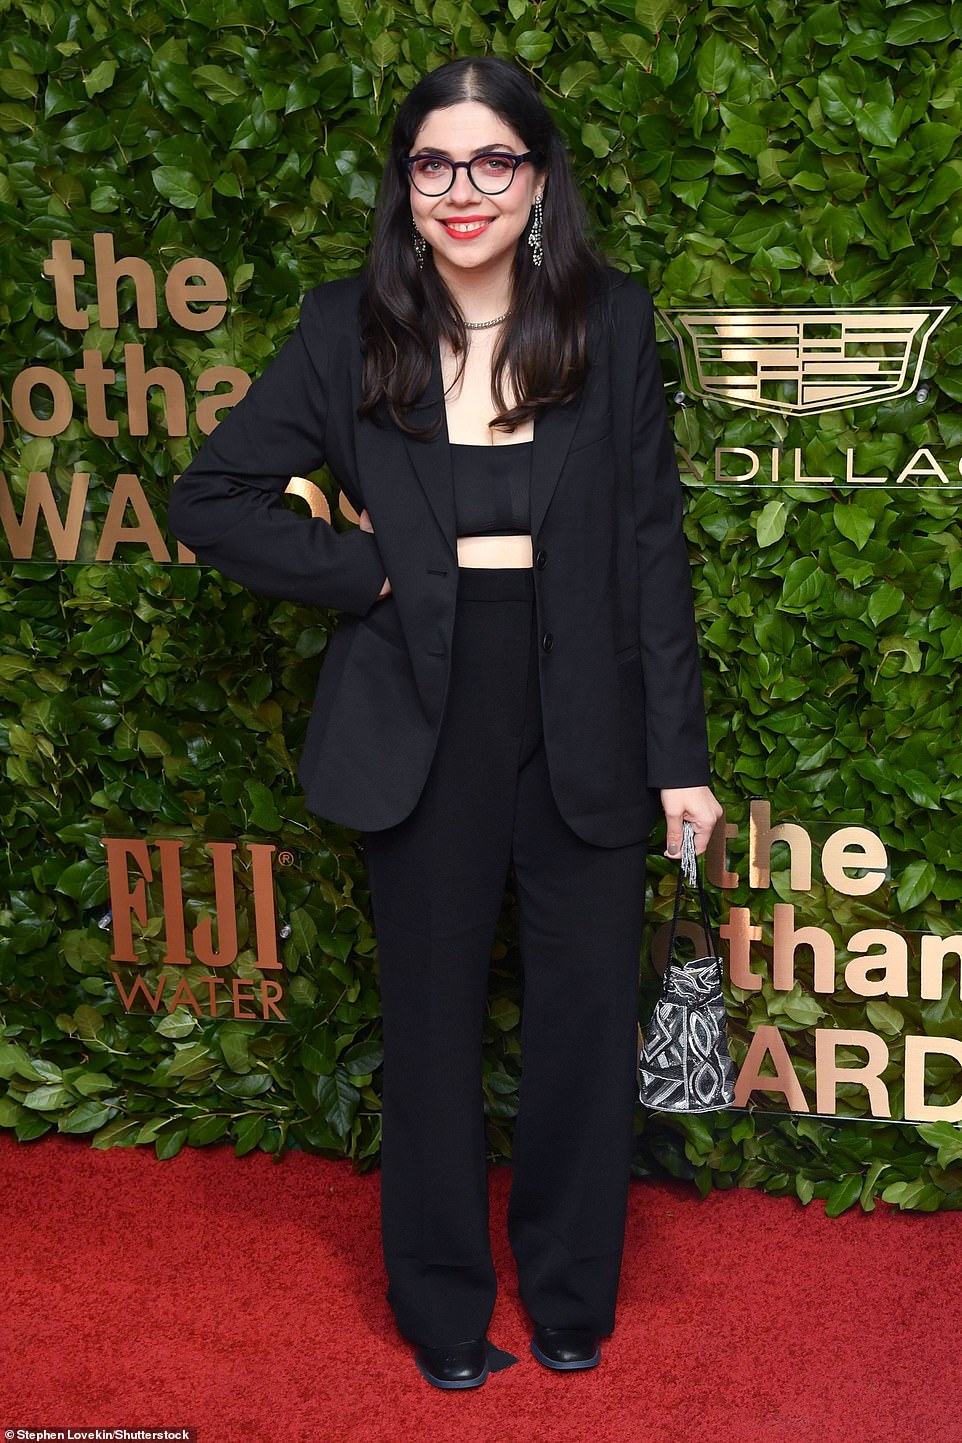 Bold: Zelda Wengrod, known for The Staircase, bared her toned midriff in a black crop top under an oversized blazer